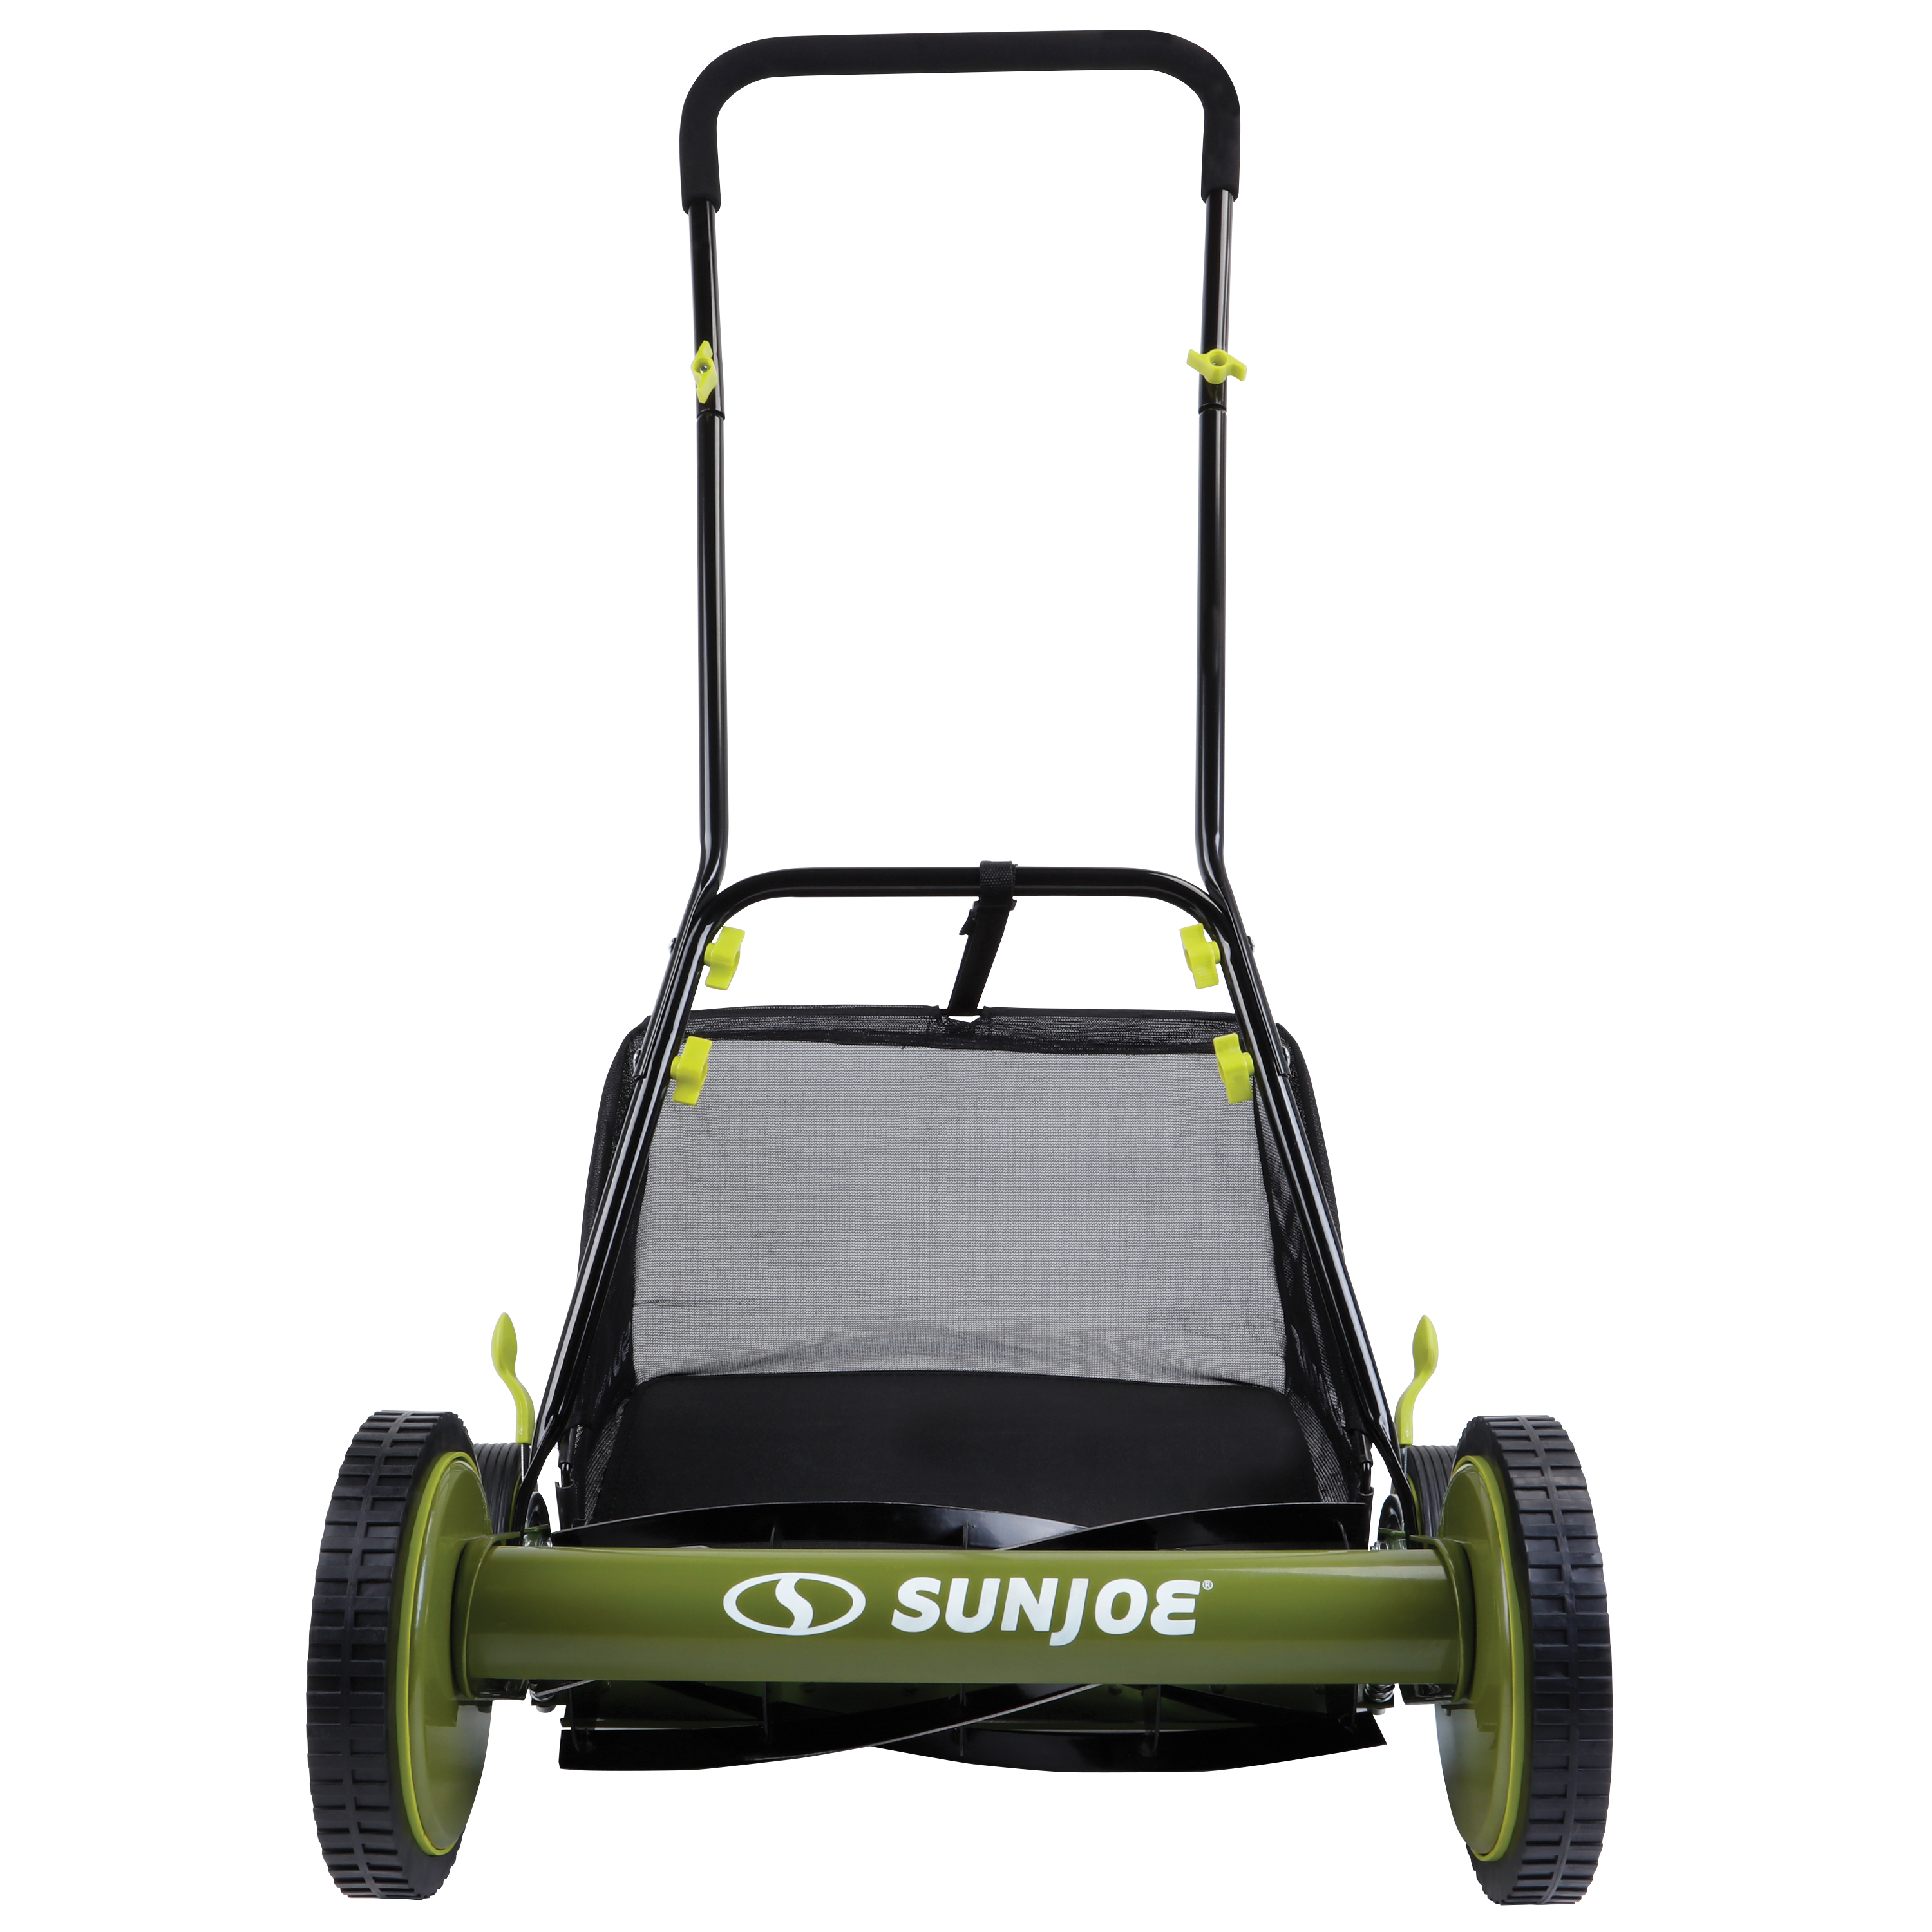 SUNJOE MJ504M Manual Reel Mower without Grass Catcher Owner's Manual